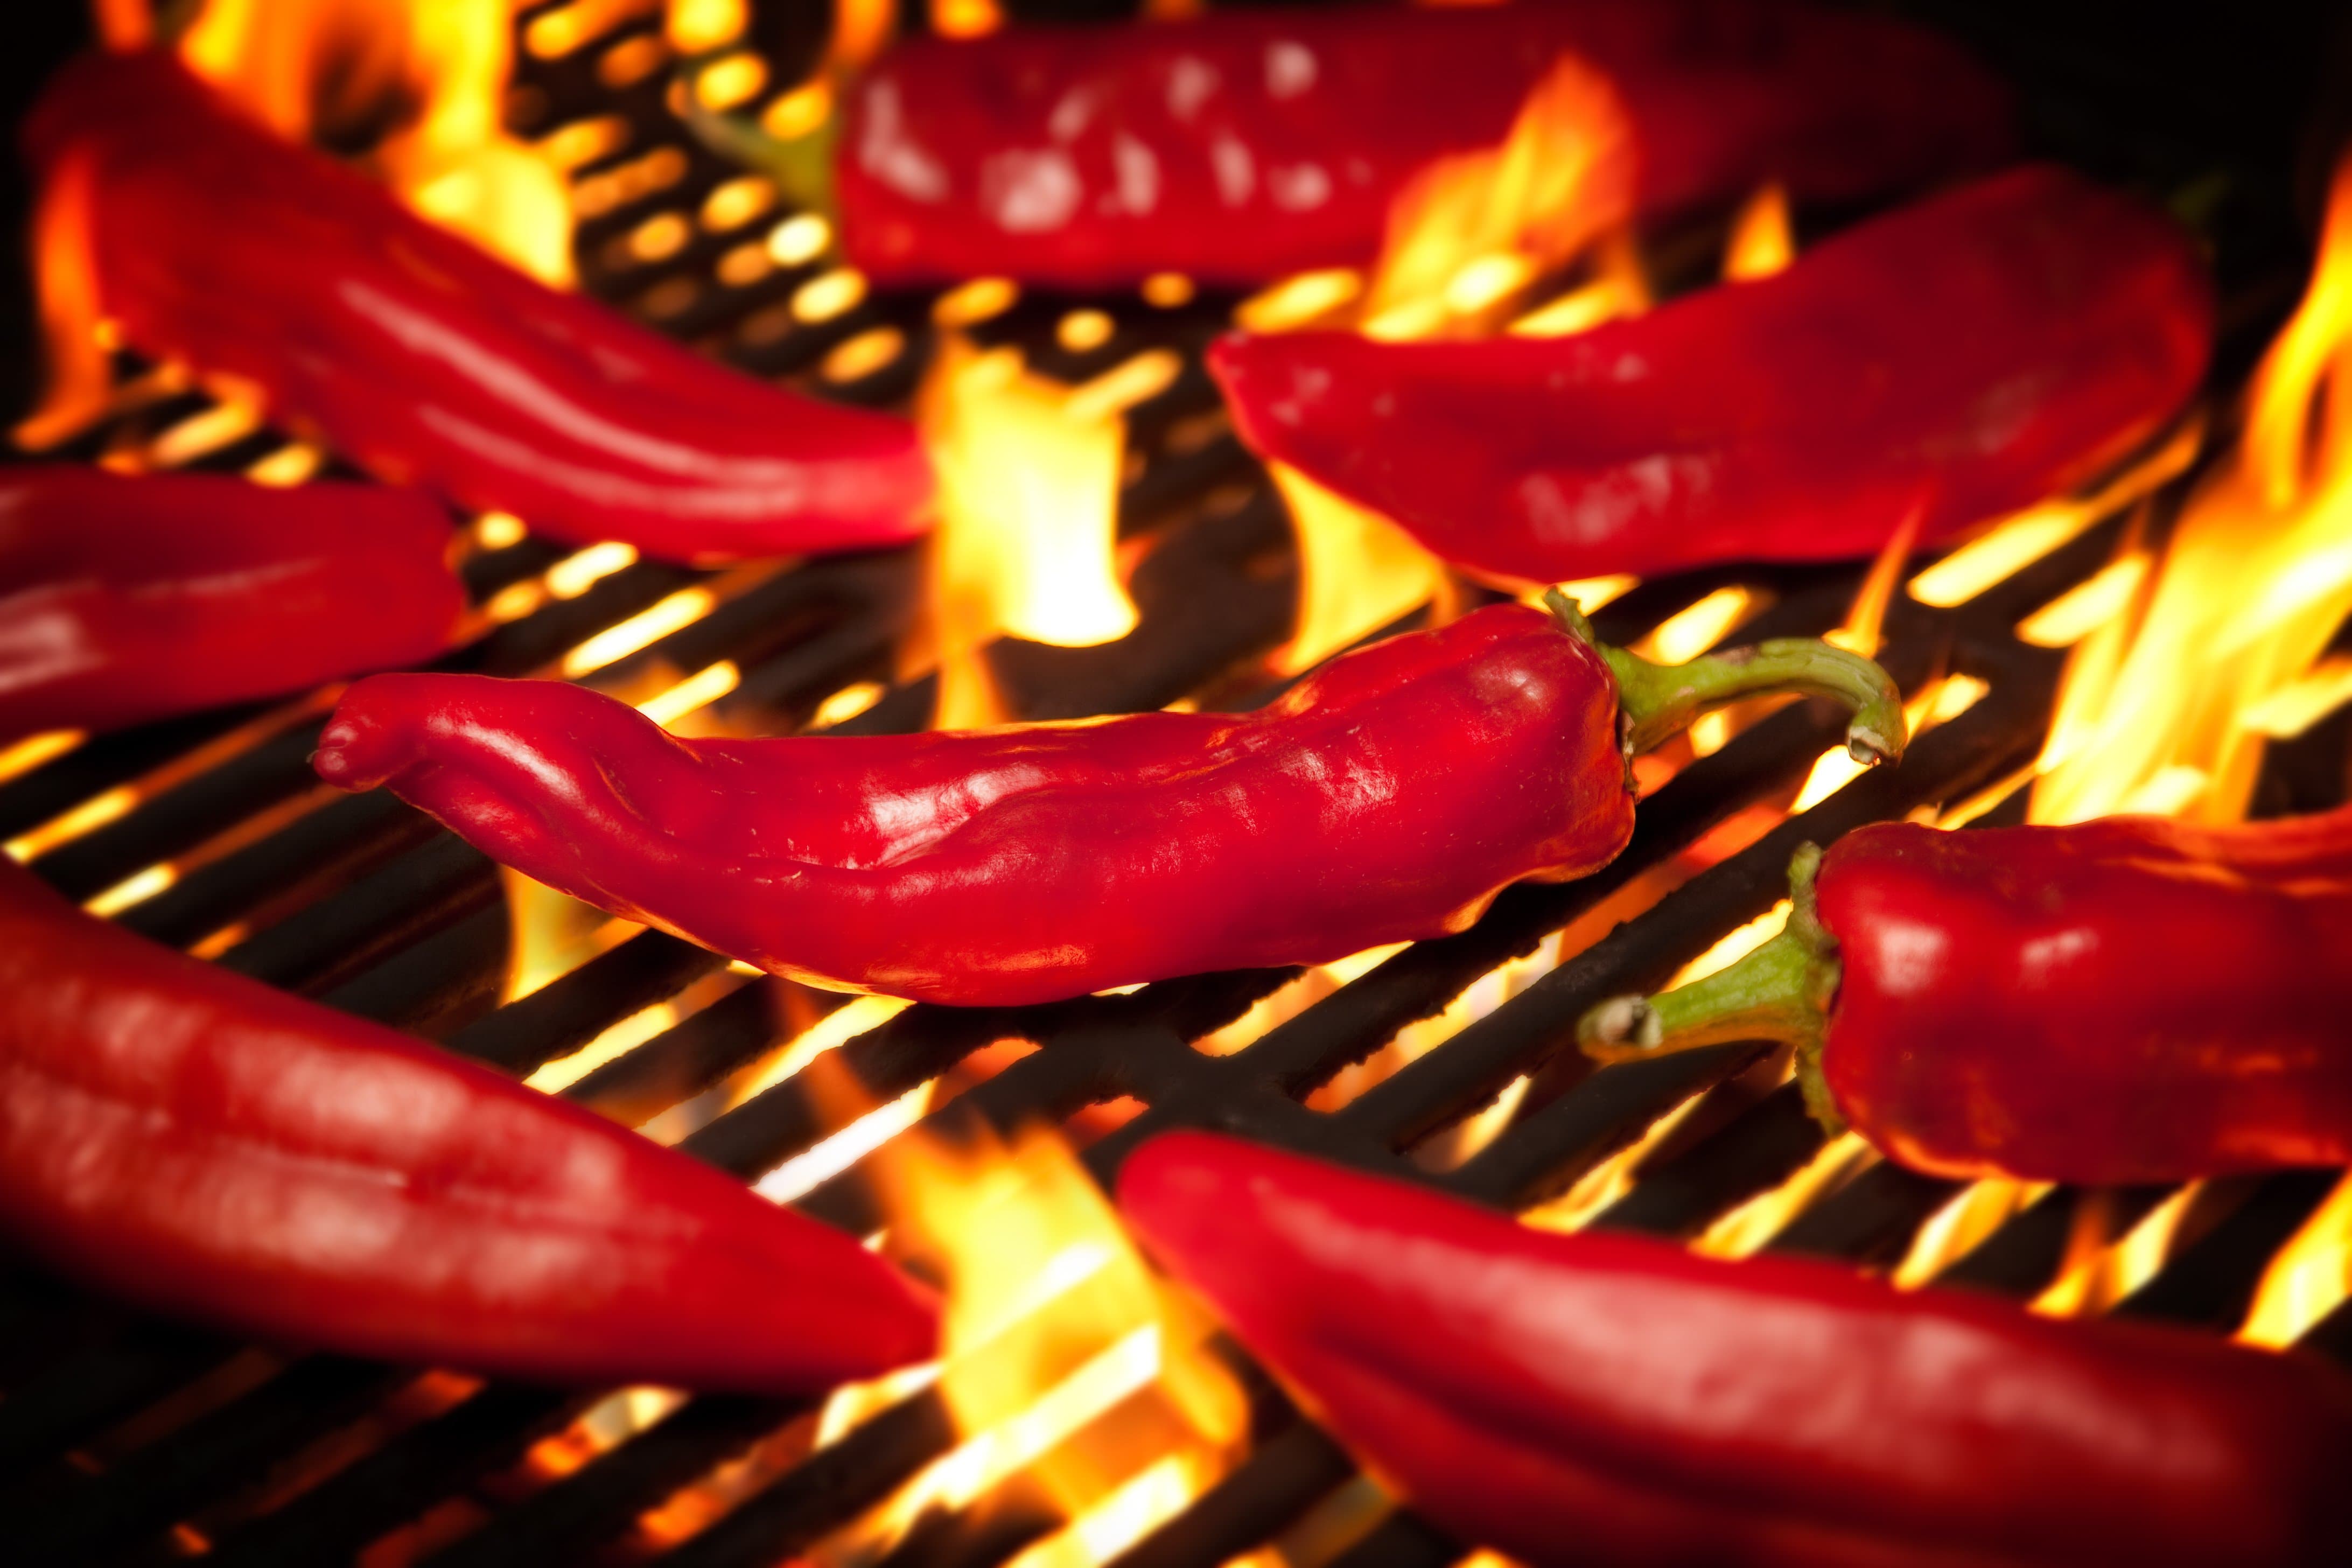 Red chili peppers grilling on a barbecue, with vibrant flames licking the underside of the grill, highlighting the glossy texture of the Fresh Hatch Red Chile Sauce-coated peppers.